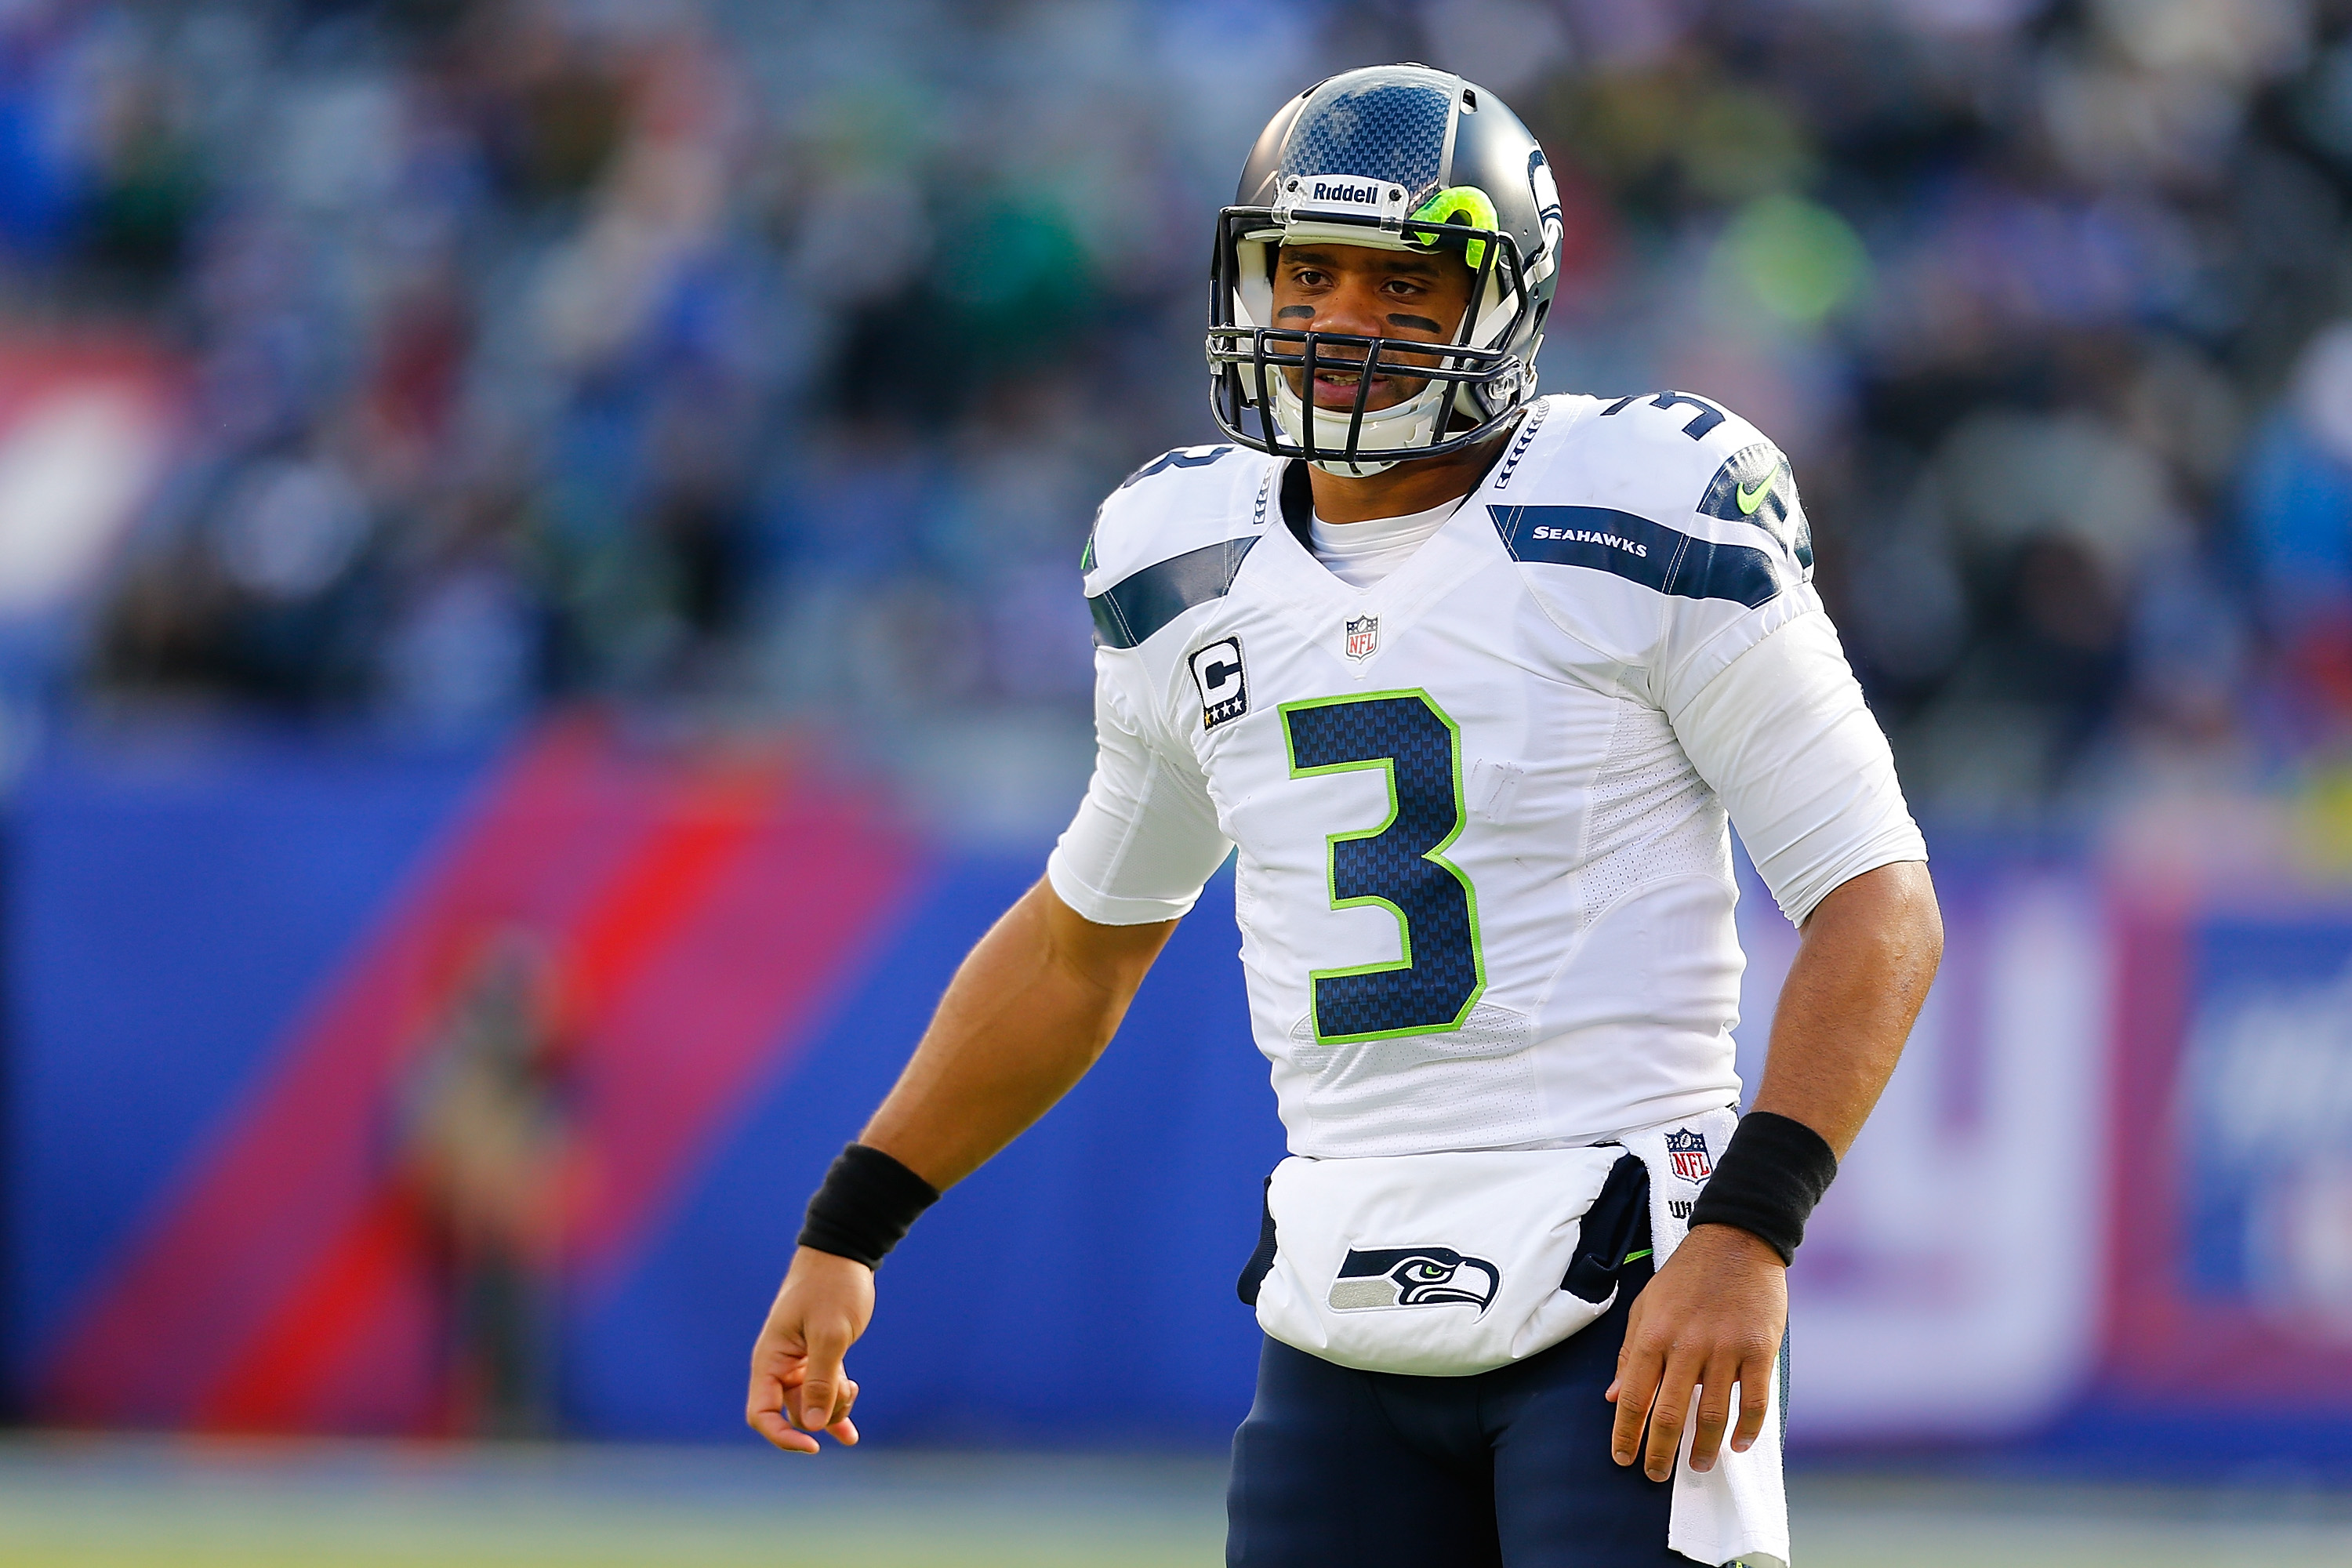 Russell Wilson looks on after a play during a Seahawks game